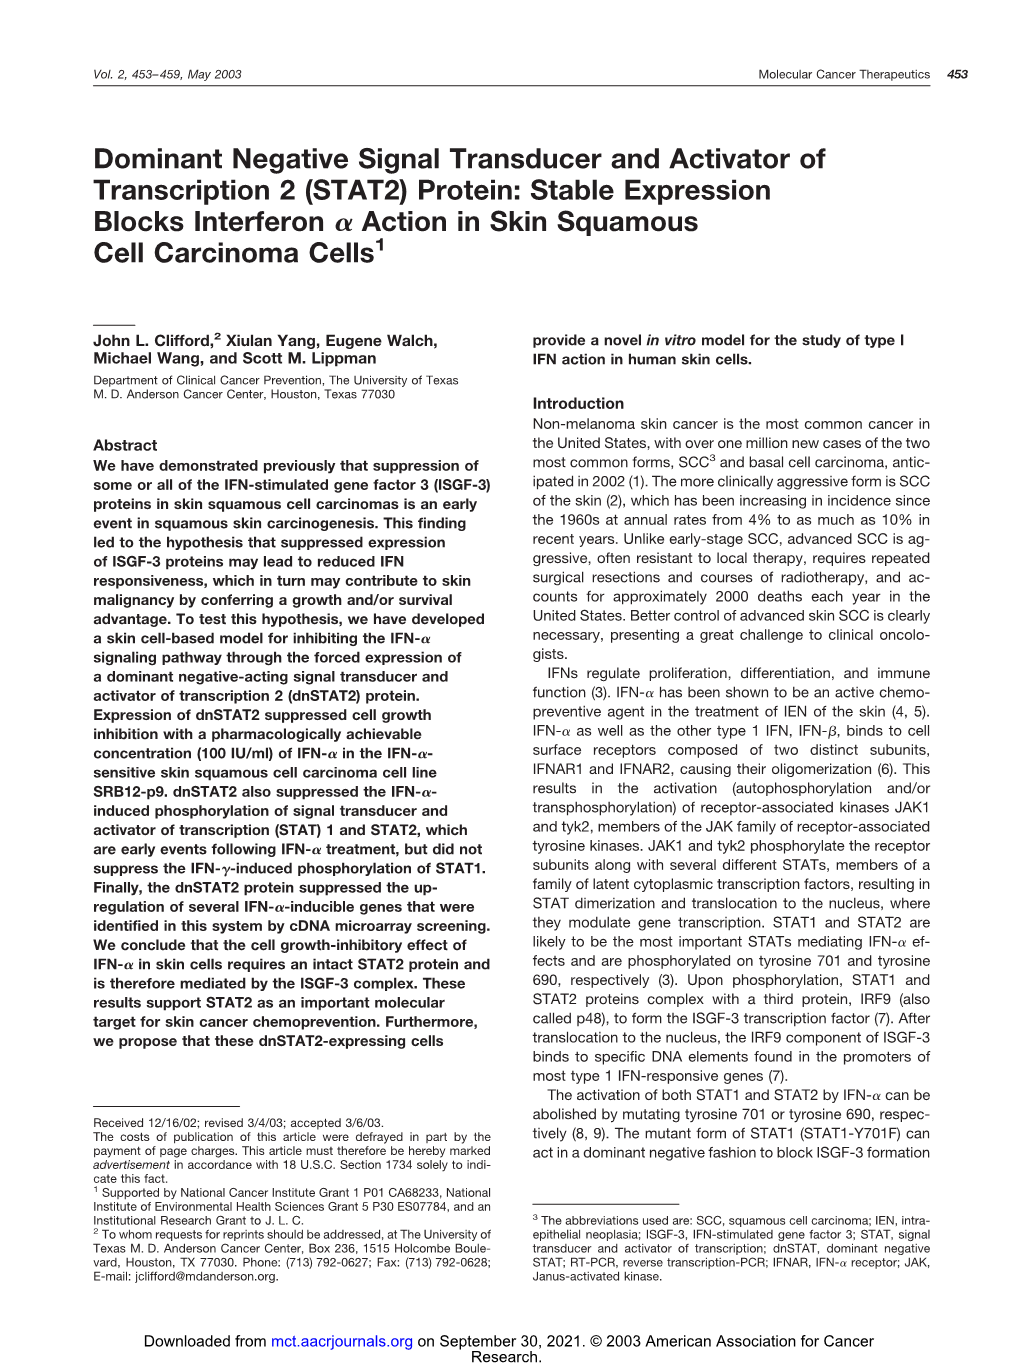 (STAT2) Protein: Stable Expression Blocks Interferon Action